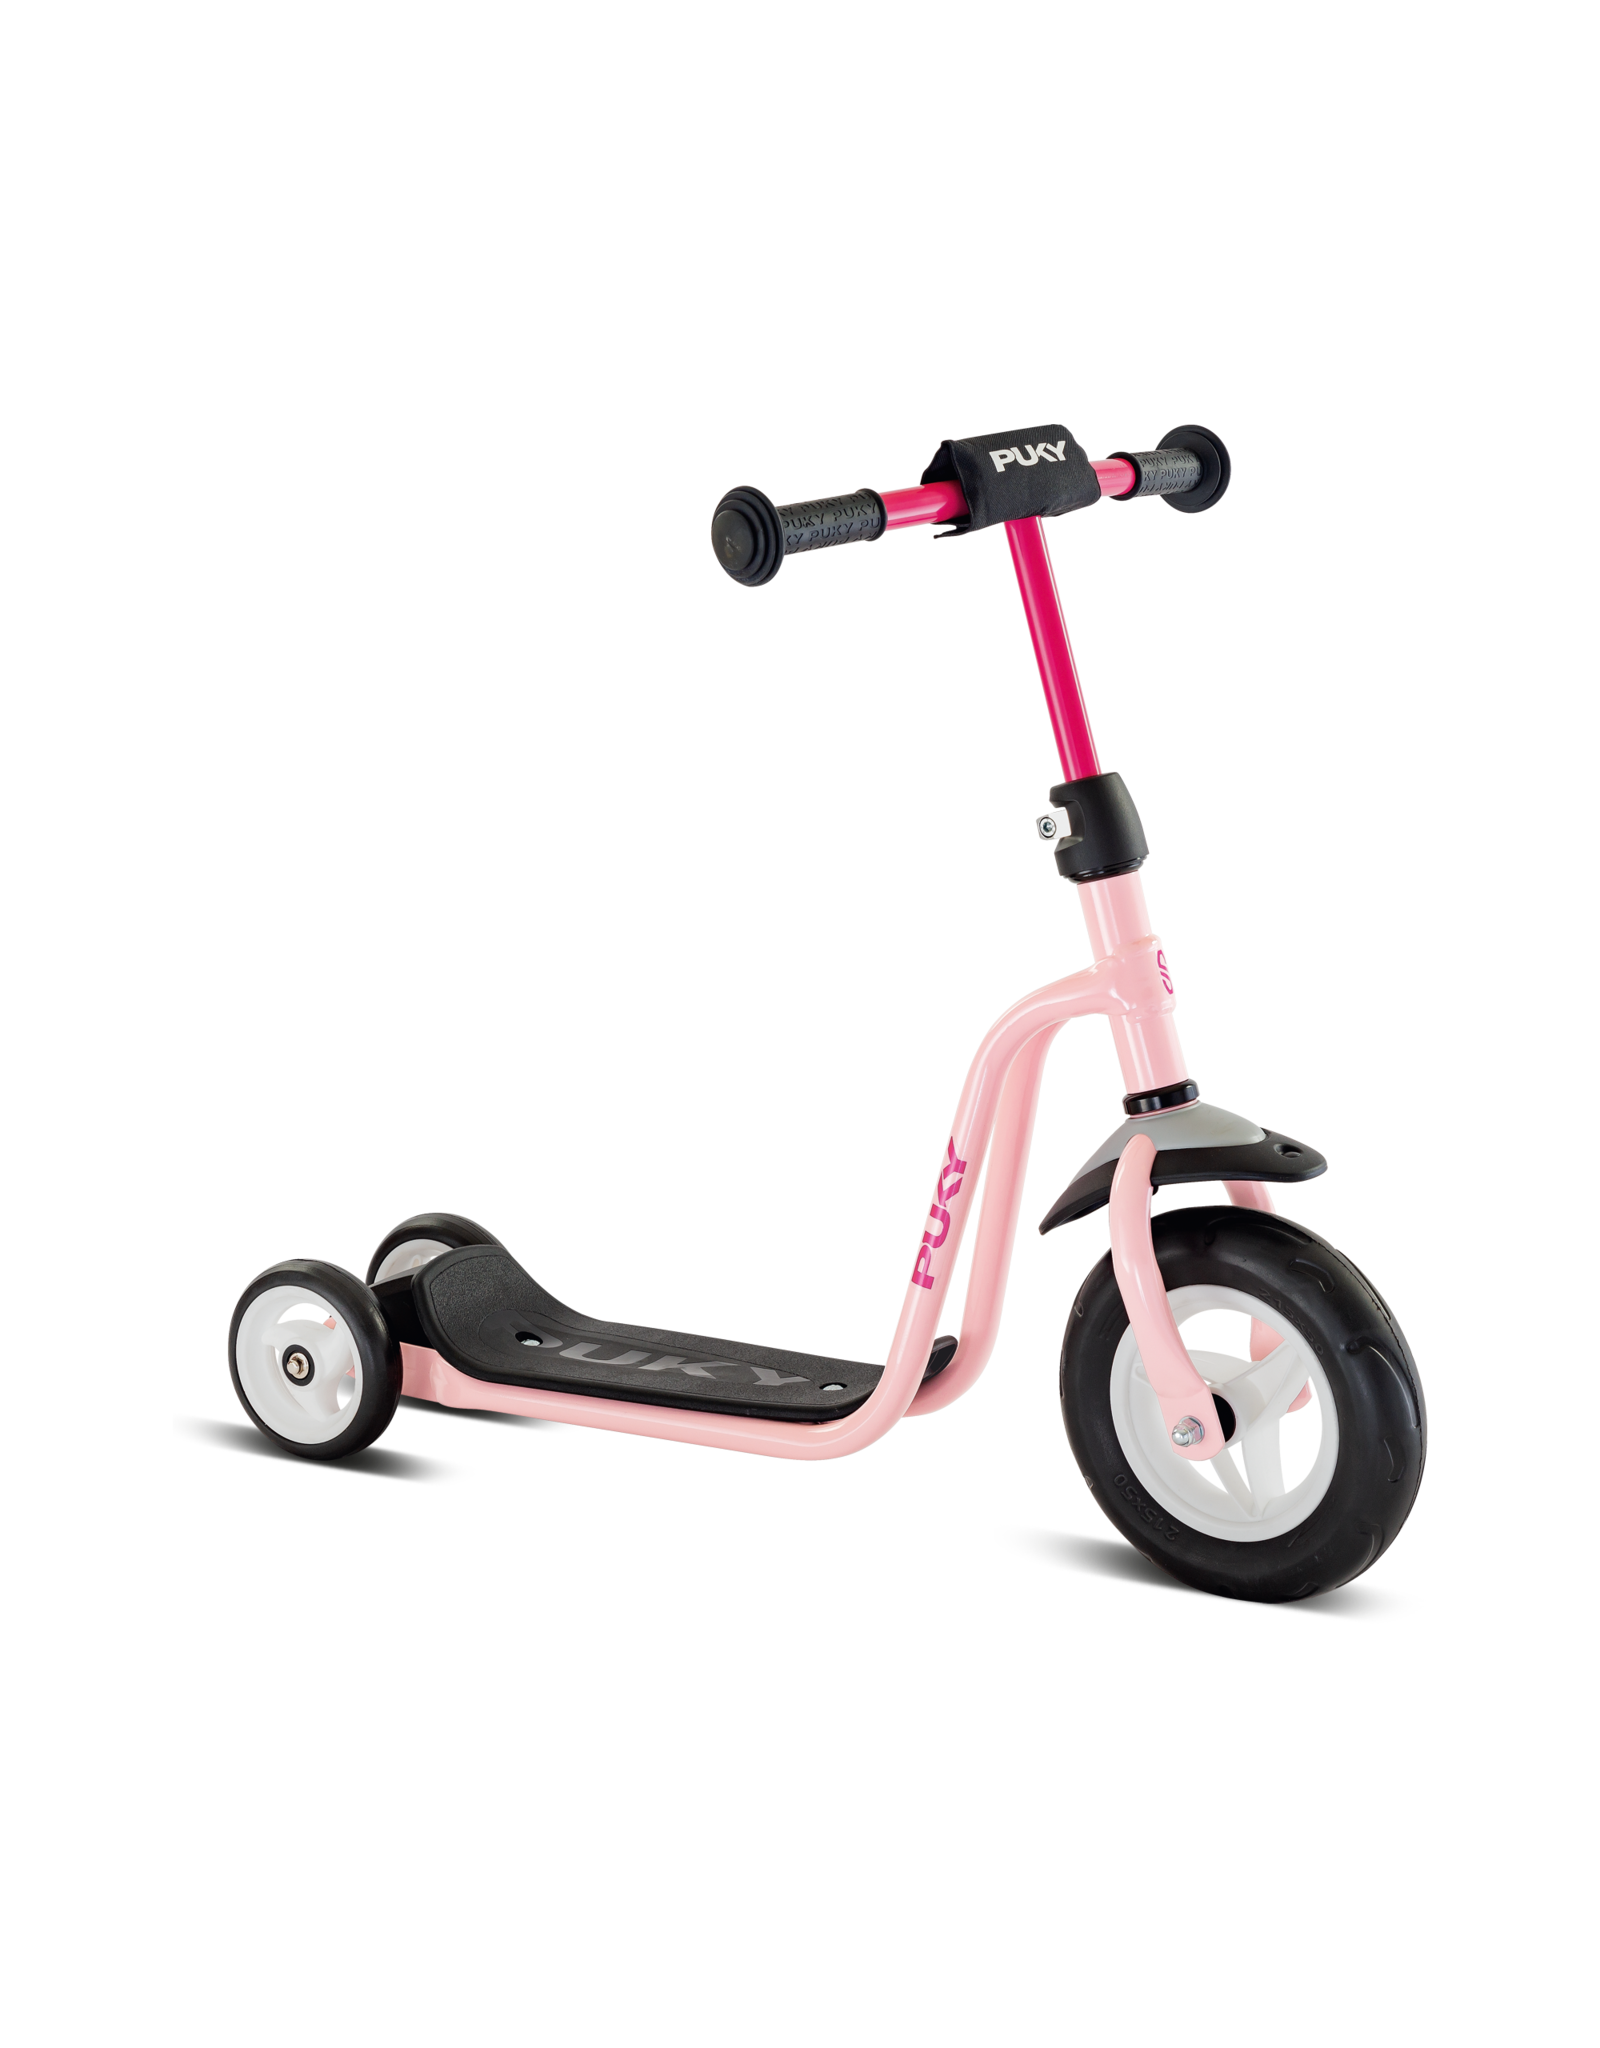 Puky Puky R1 Scooter retro pink